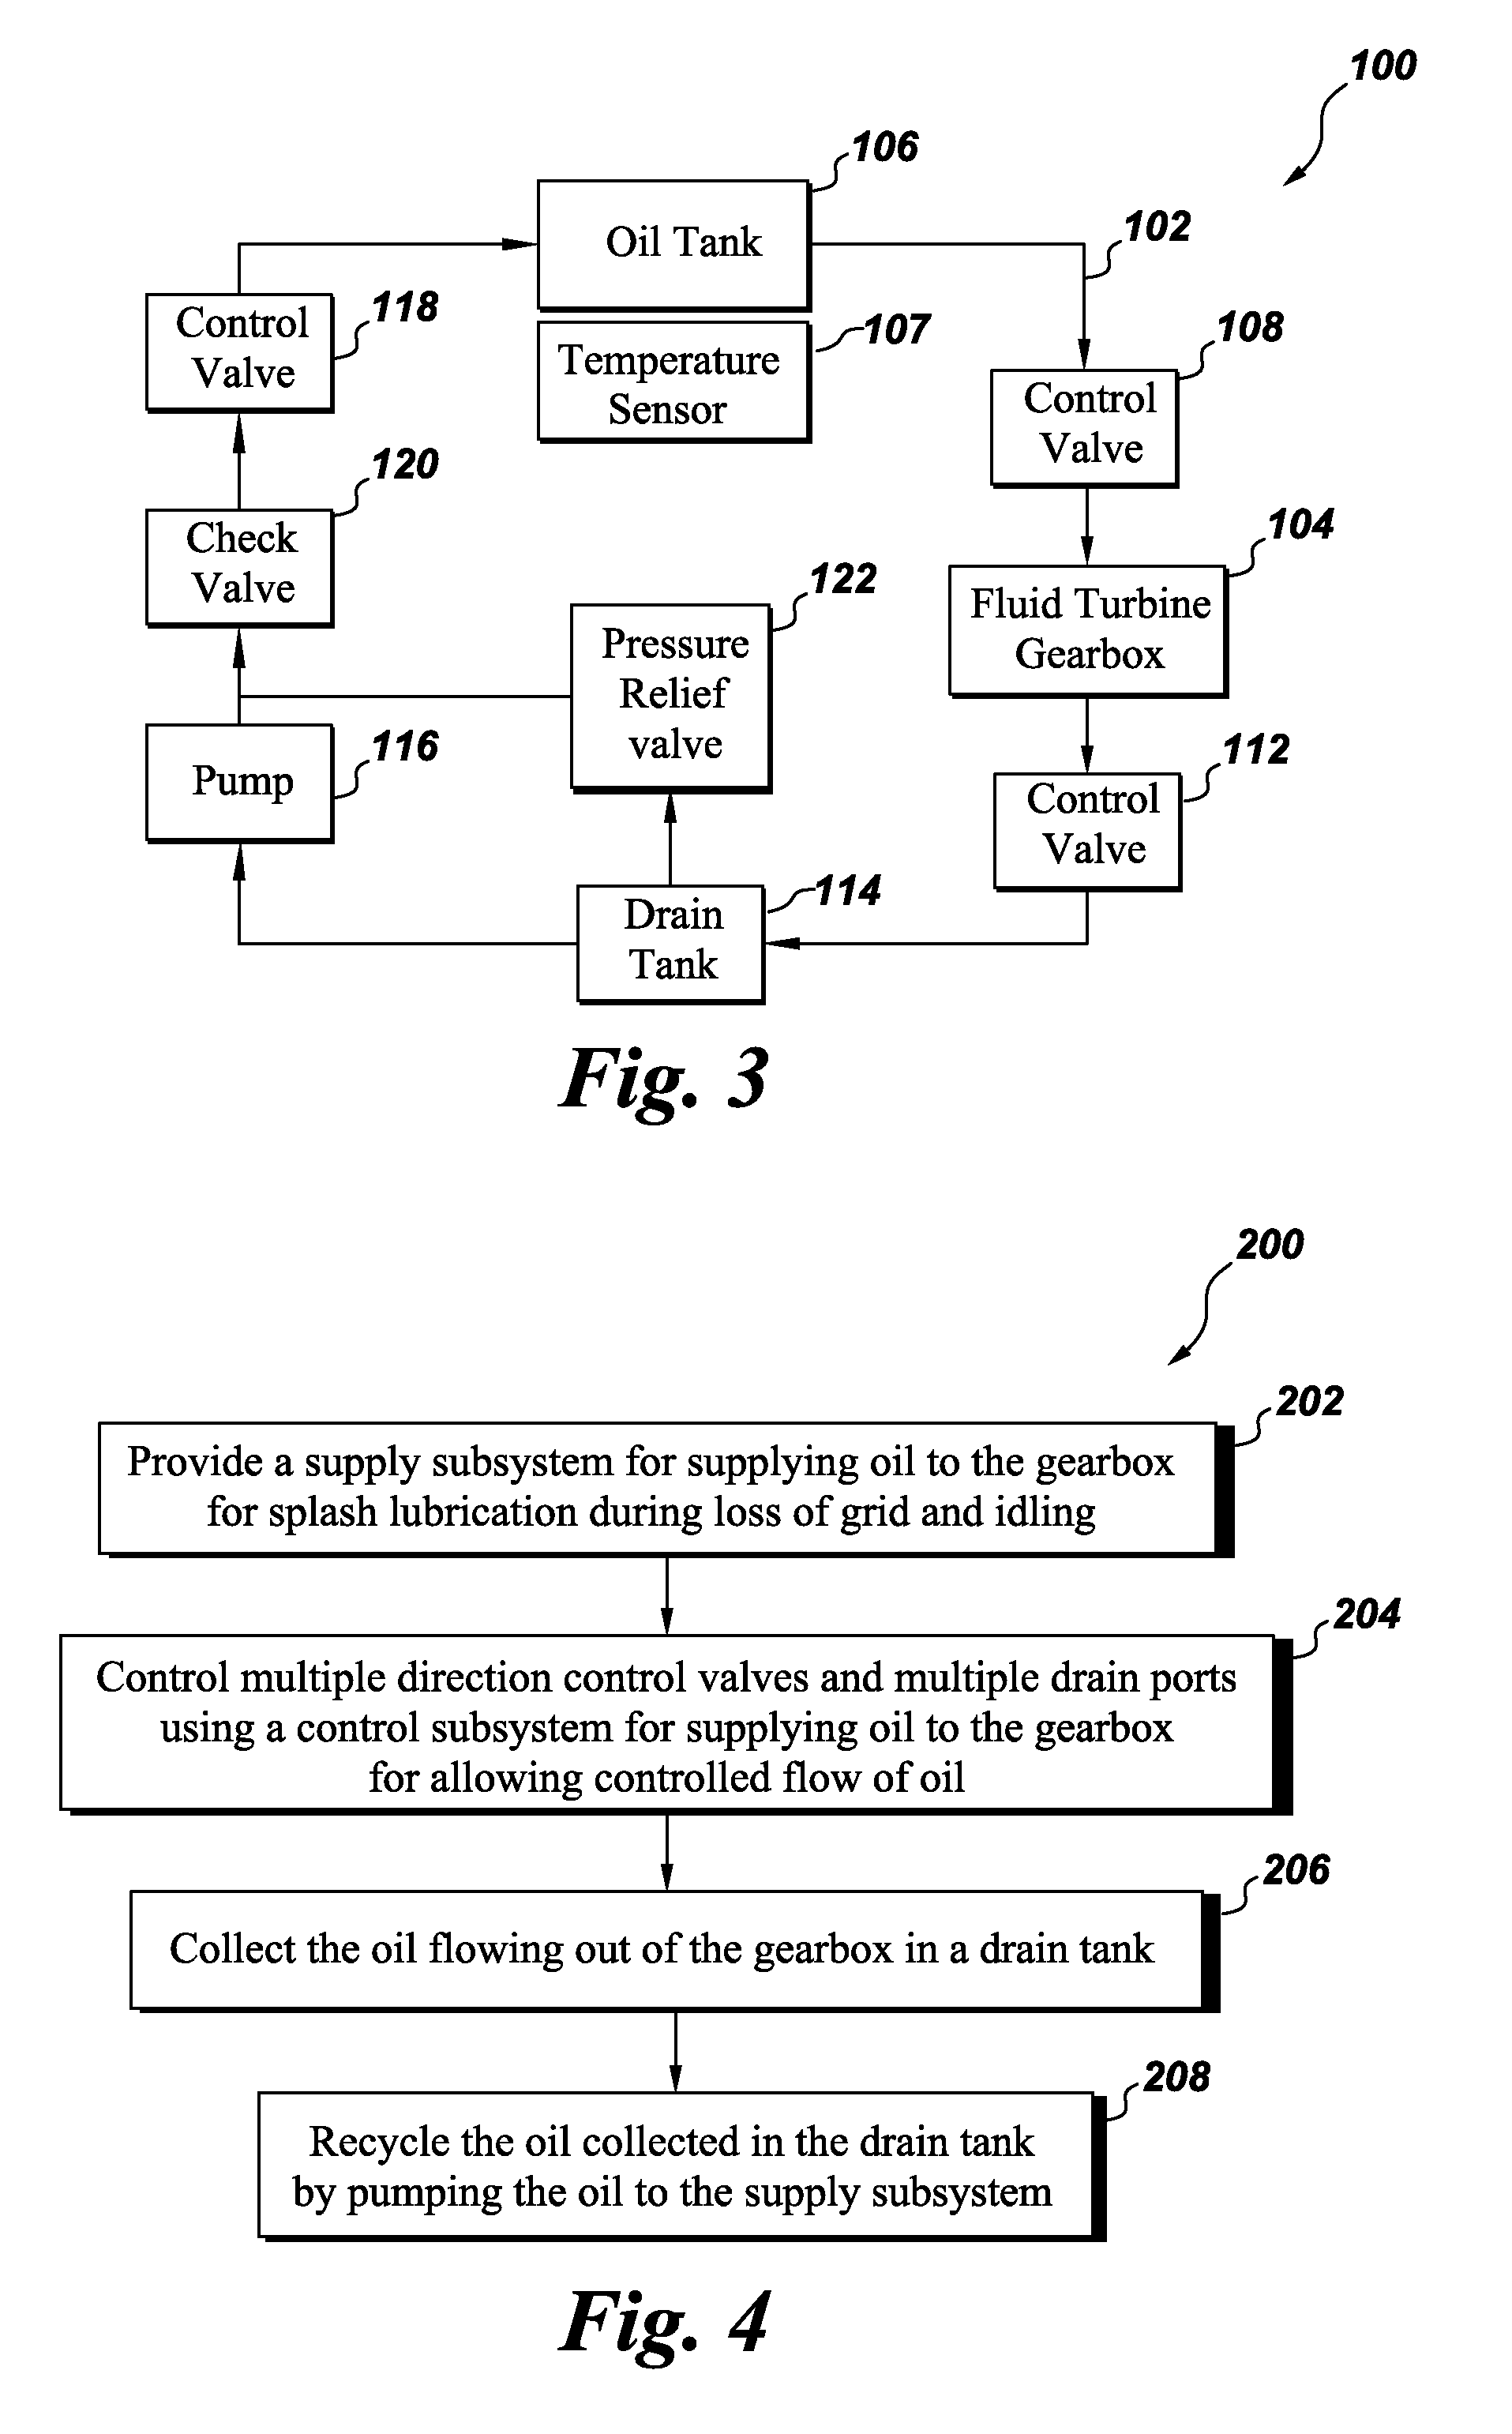 Lubrication of fluid turbine gearbox during idling or loss of electric grid